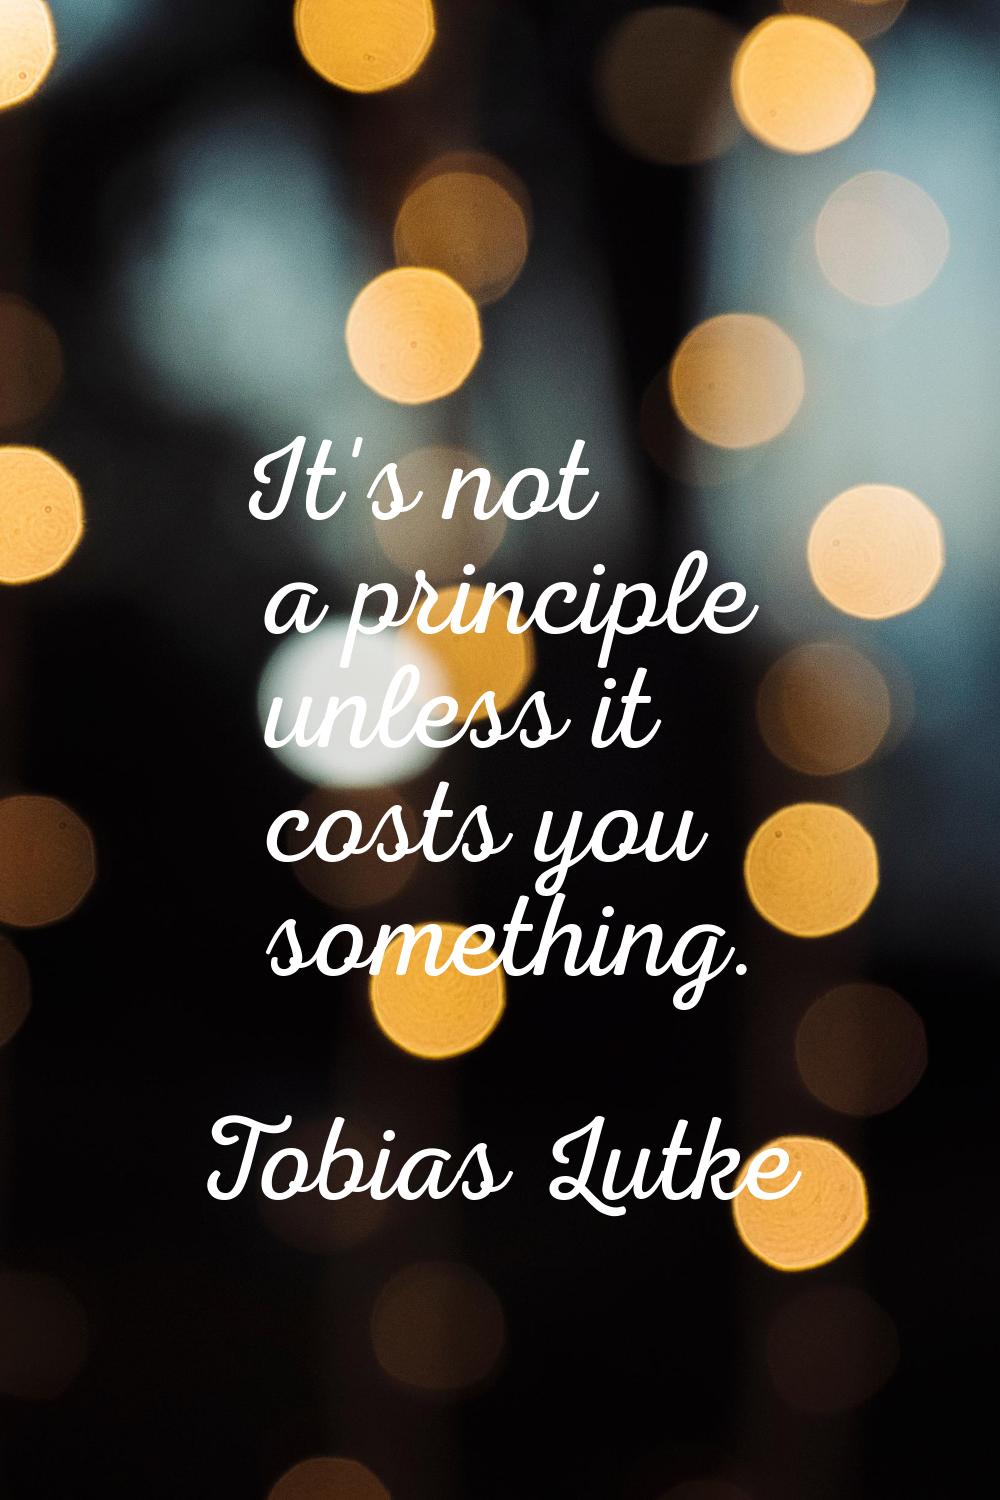 It's not a principle unless it costs you something.